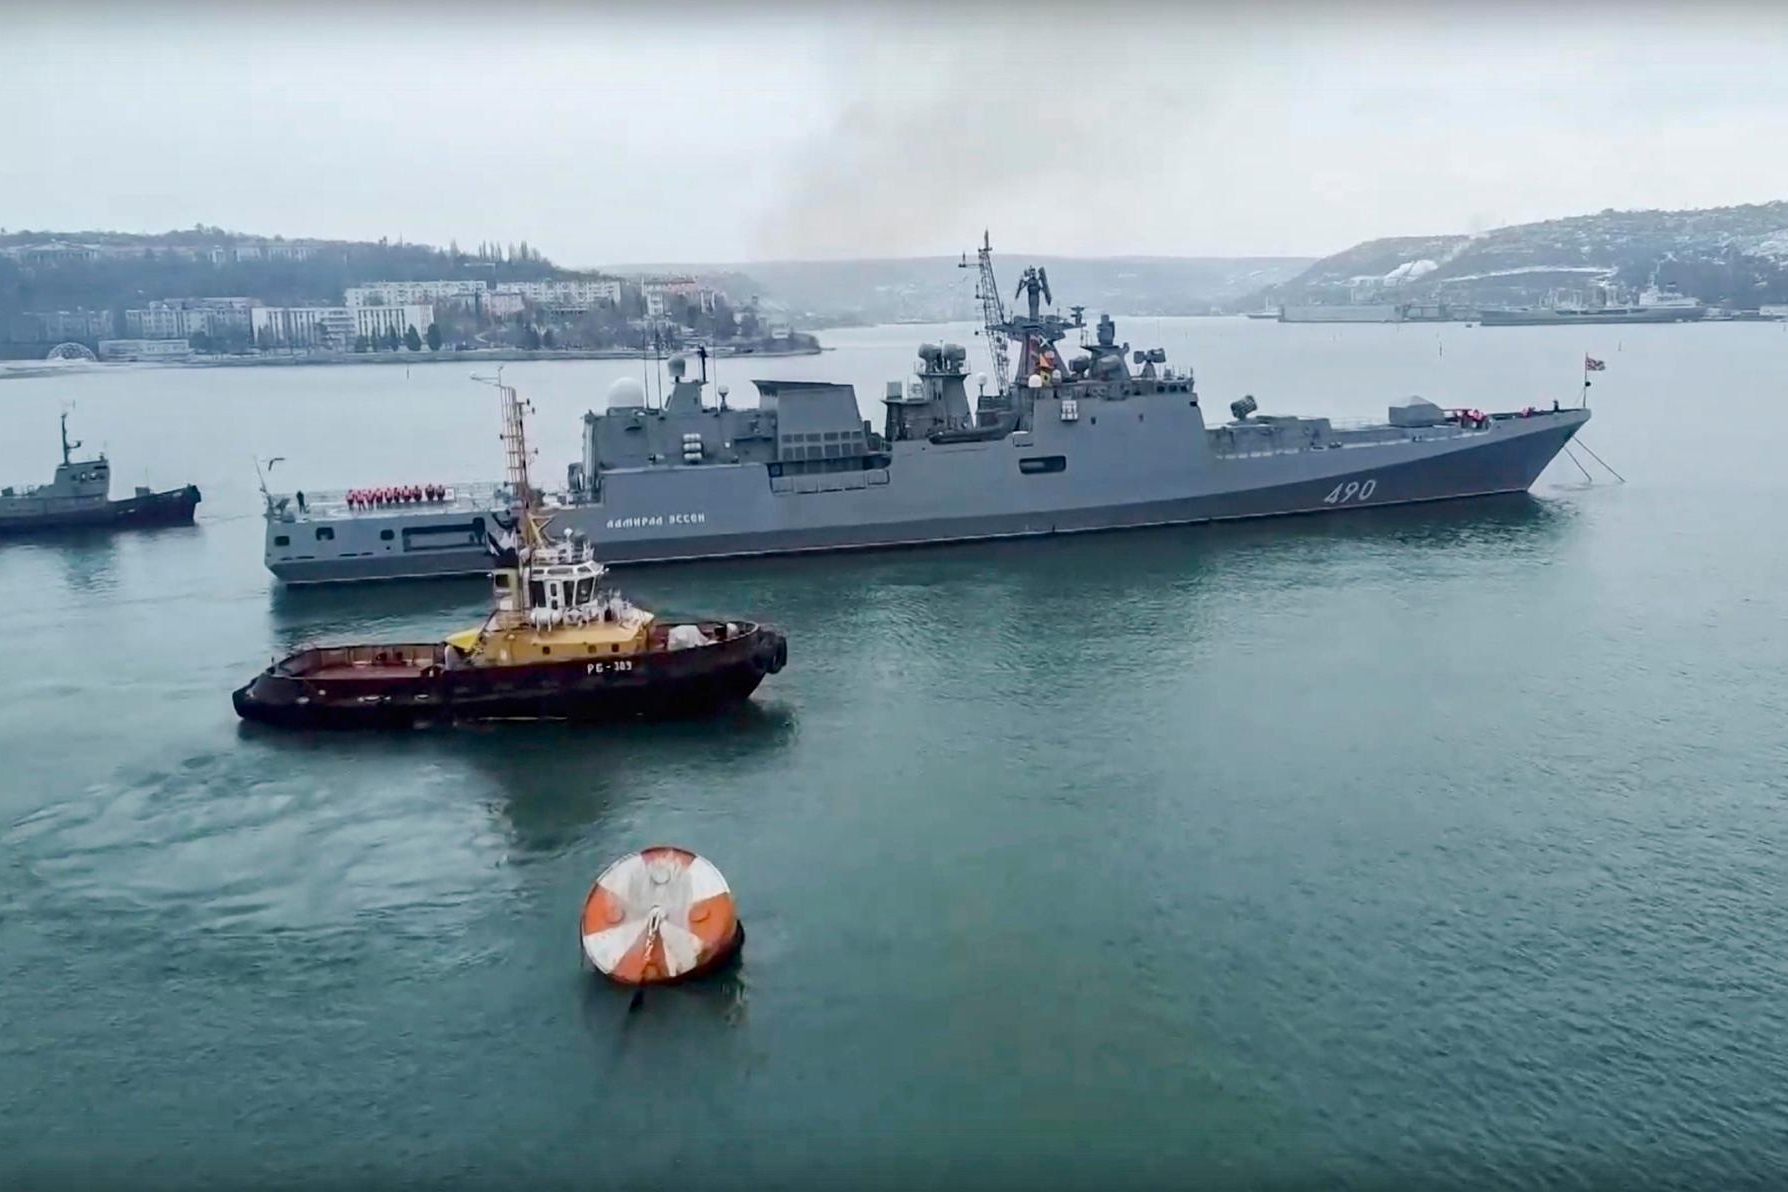 epa09712163 A frame grab taken from a handout video made available by the Russian Defence Ministry Press Service shows a Russian navy ship preparing to take part in exercises in the Black Sea, in Sevastopol, Crimea, 26 January 2022 (issued 27 January 2022). More than 20 ships from Russian Navy's Black Sea Fleet took part in the exercises in the Black Sea. EPA/RUSSIAN DEFENCE MINISTRY PRESS SERVICE HANDOUT -- BEST QUALITY AVAILABLE -- MANDATORY CREDIT: RUSSIAN DEFENCE MINISTRY PRESS SERVICE -- HANDOUT EDITORIAL USE ONLY/NO SALES